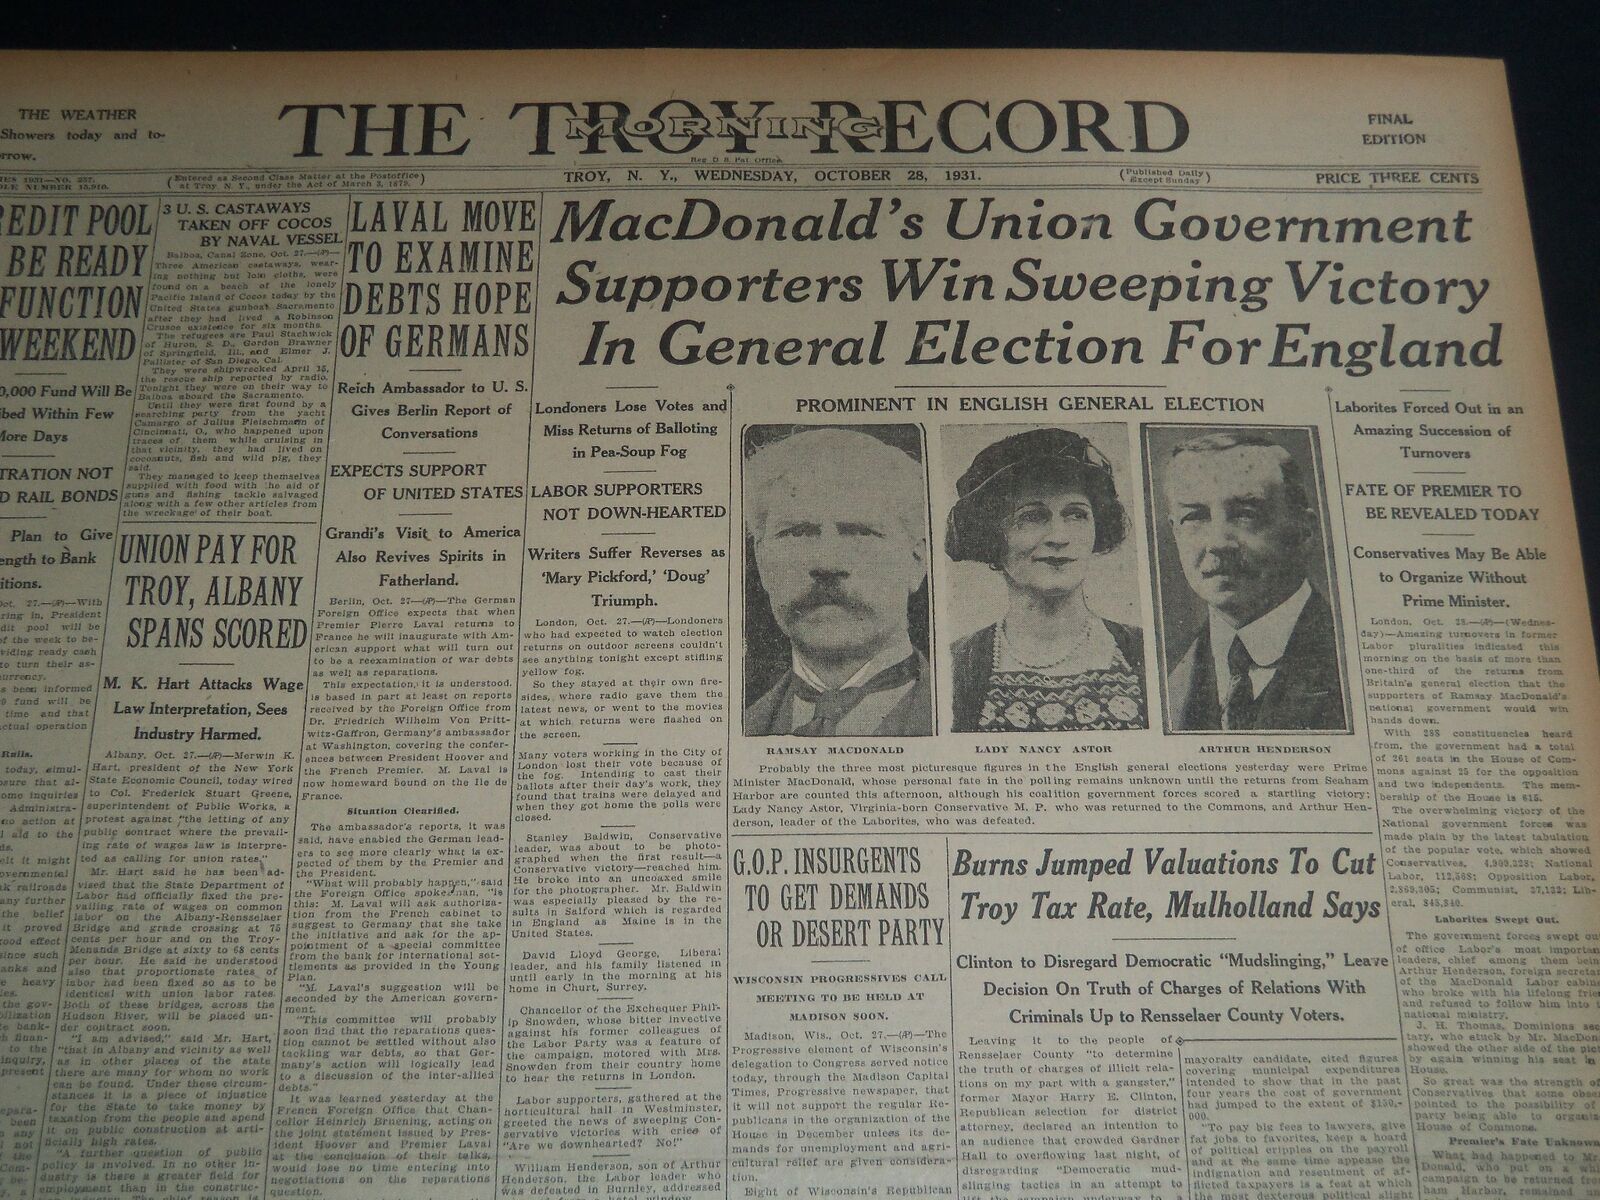 1931 OCTOBER 28 TROY MORNING RECORD - MACDONALD'S UNION GOVERNMENT WINS- NT 7492